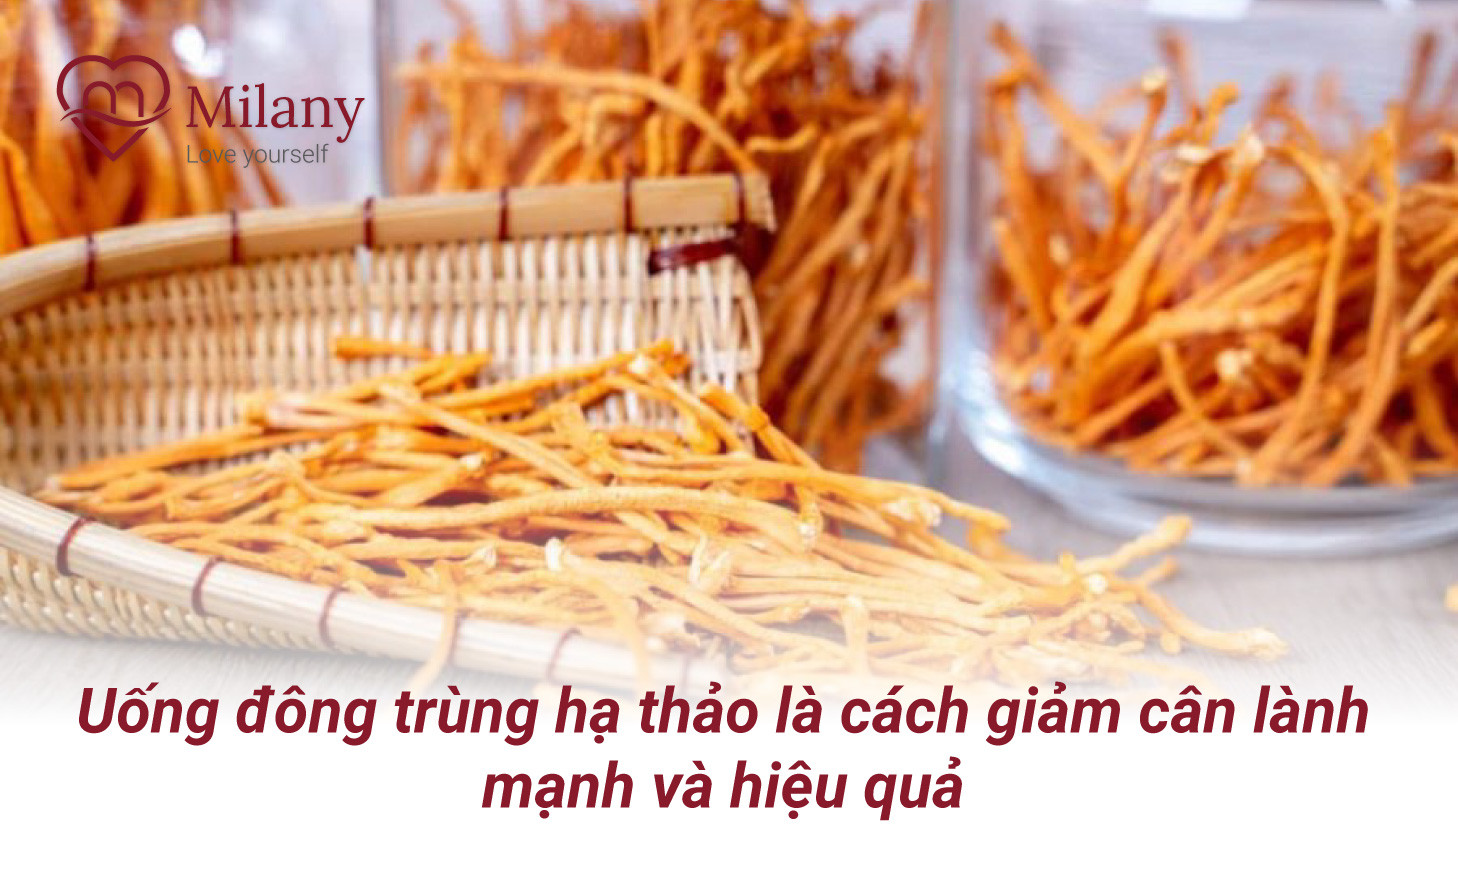 giam can dong trung ha thao